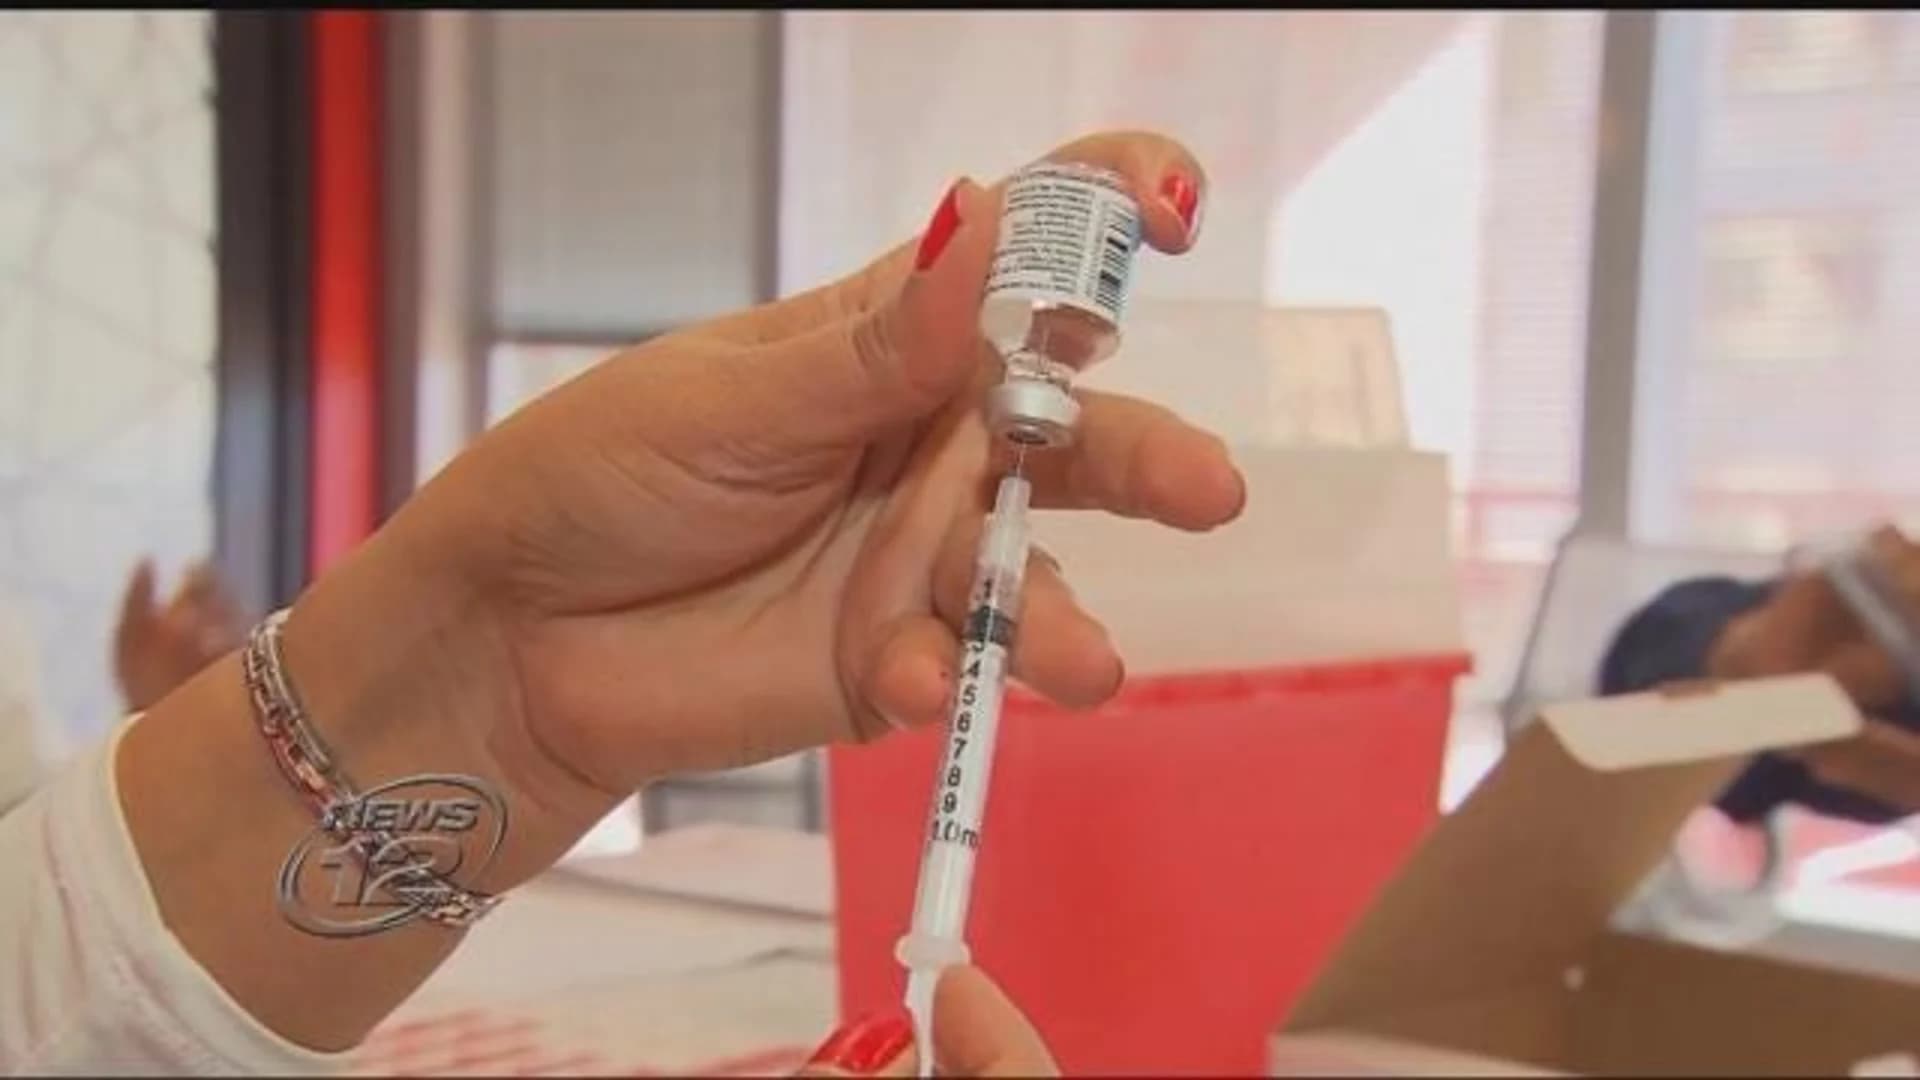 Executive Day: 500 vaccinations given since start of measles emergency